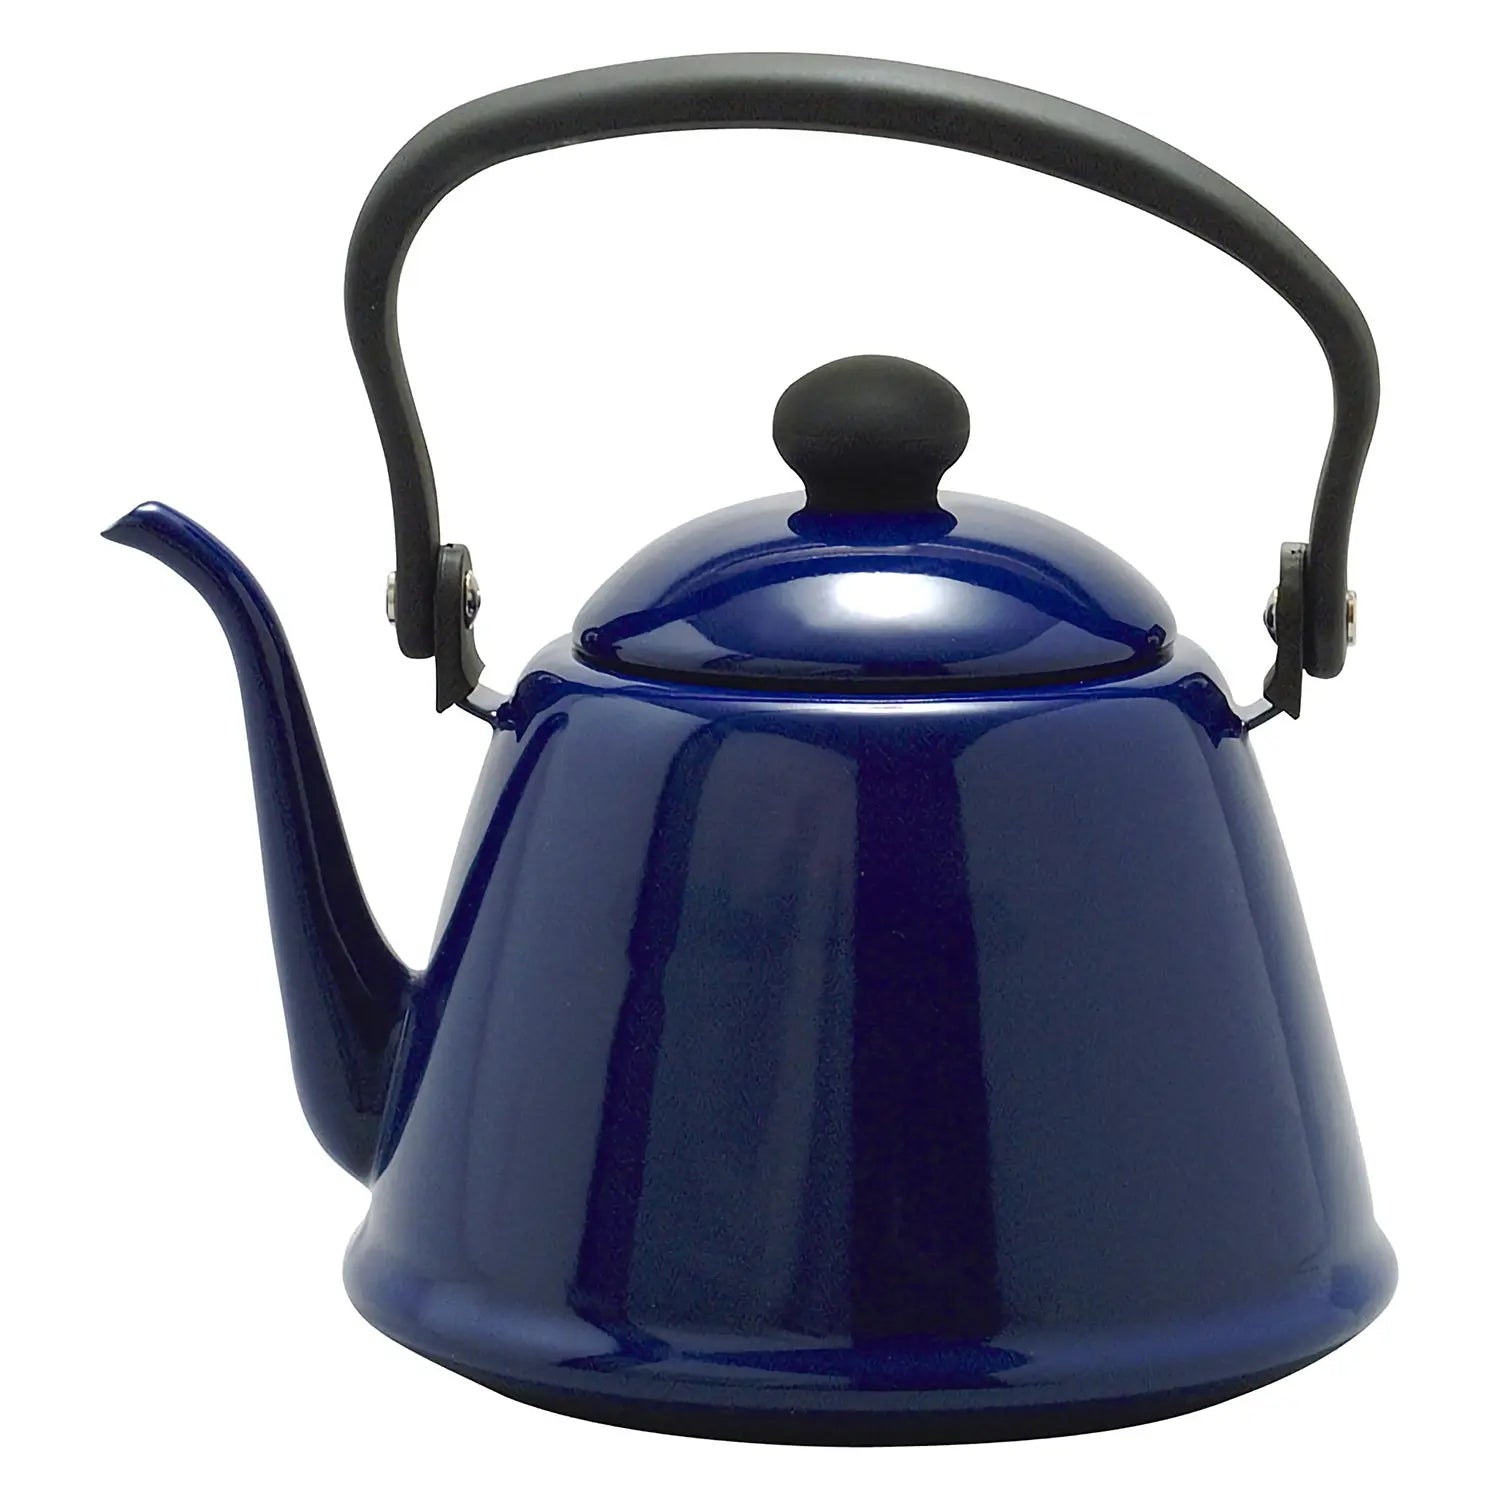 Kitchen, Blue Enamel Ware Kettle No Lid Immaculate Shape No Rust Or Chips  Tea Pot